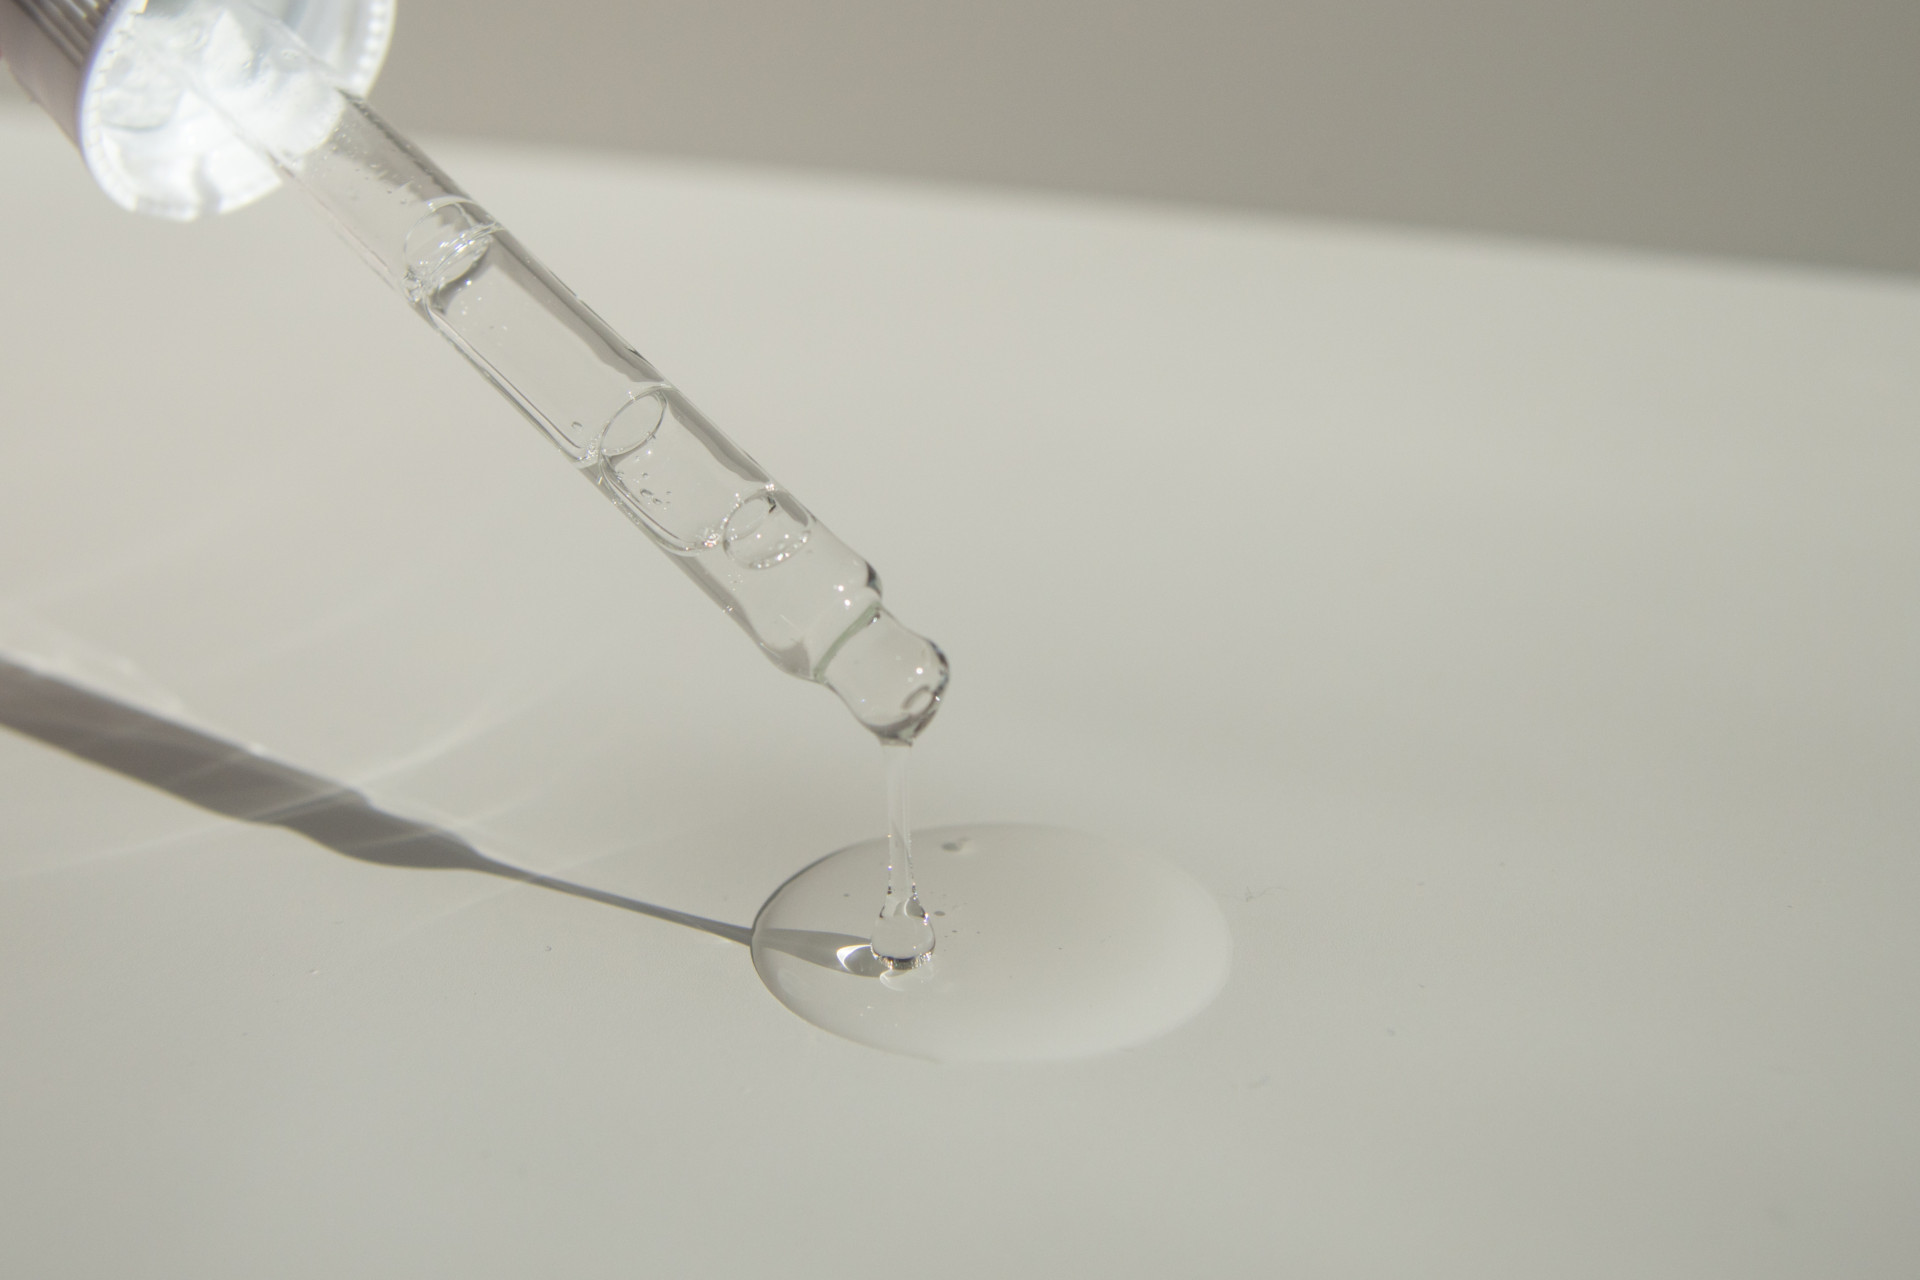 Pipette dropping oil onto grey surface